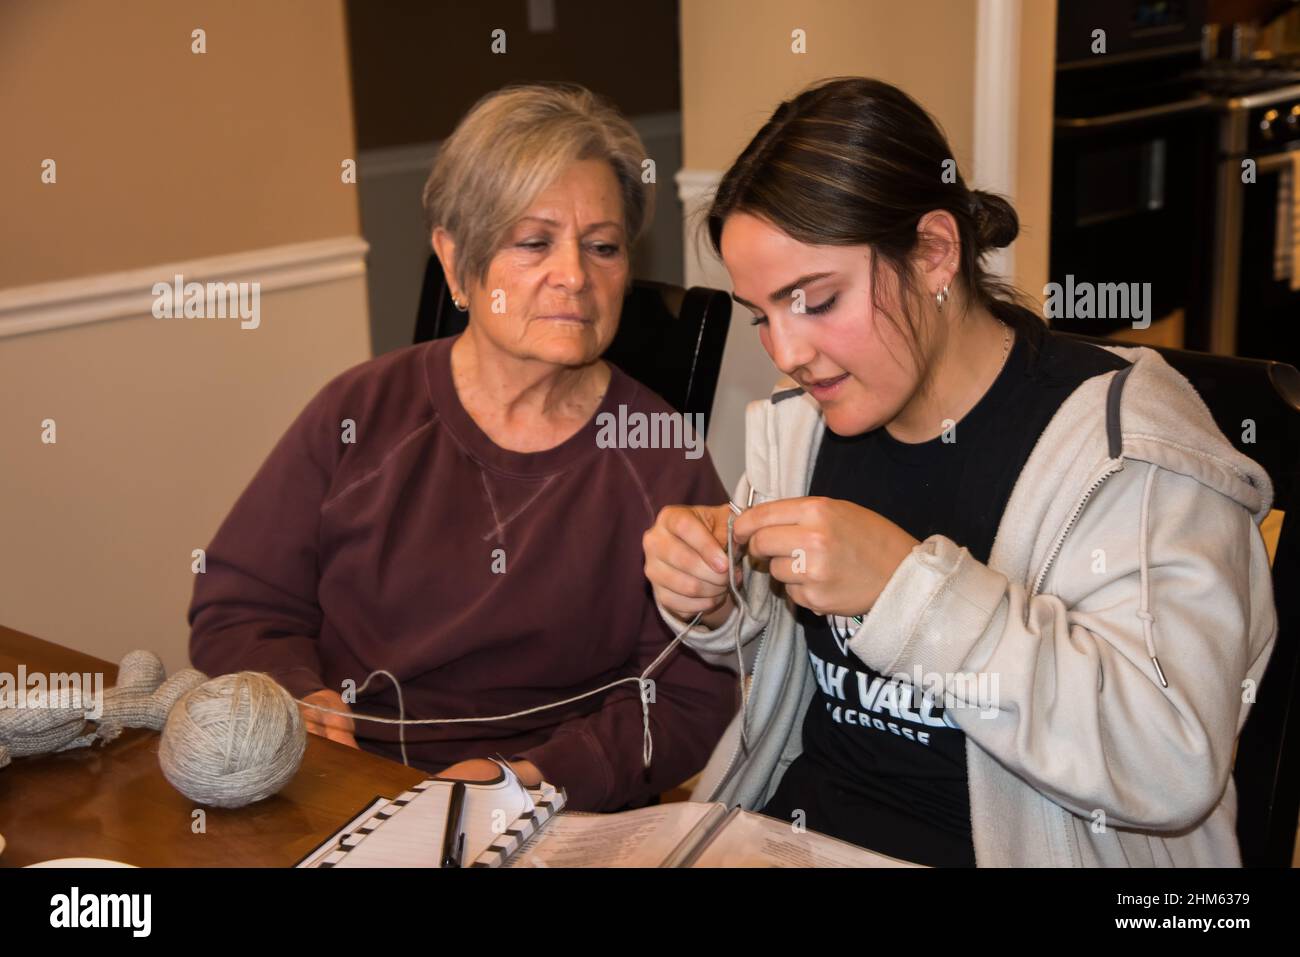 Nana watches with a critical eye as she teaches her grand daughter how to knit. The art and craft of knitting is lost on the millennial generation. Stock Photo